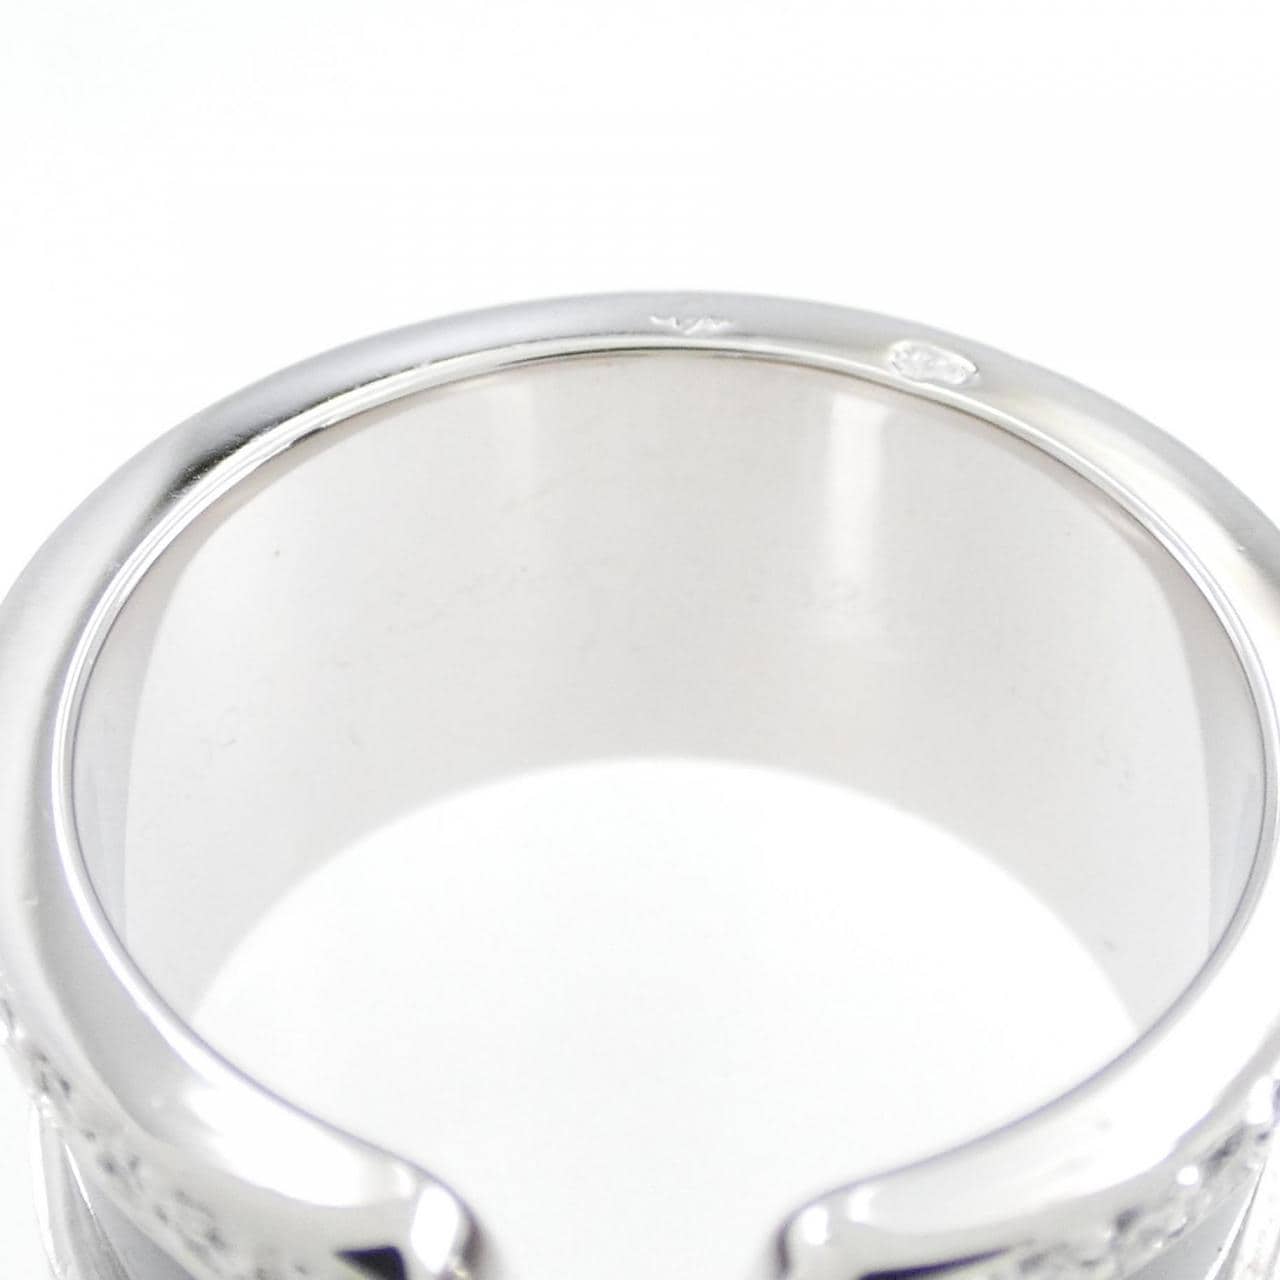 Cartier C2 ring